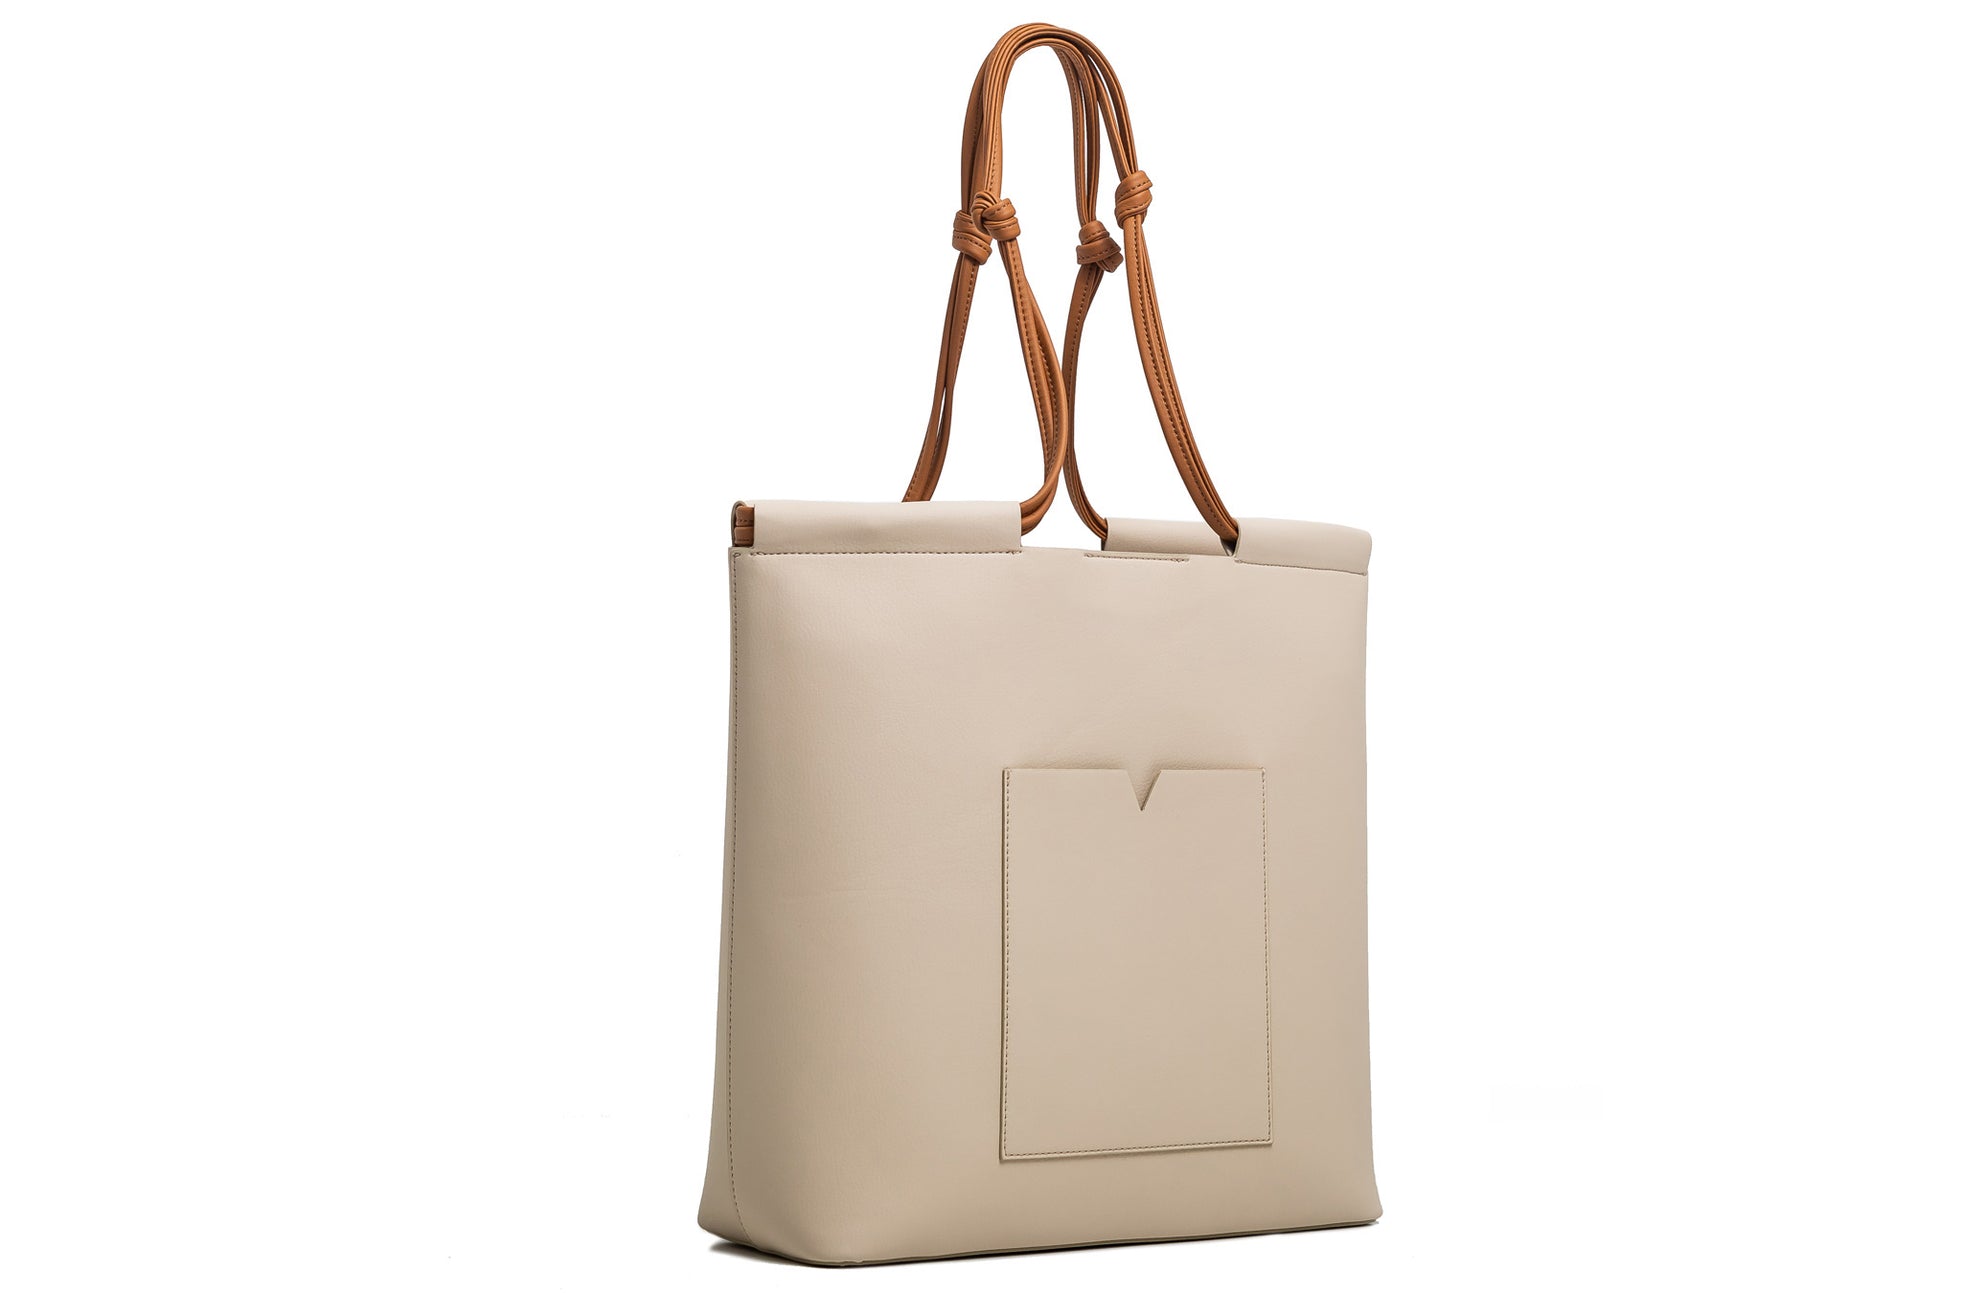 The Market Tote in Technik-Leather in Oat and Caramel image 3